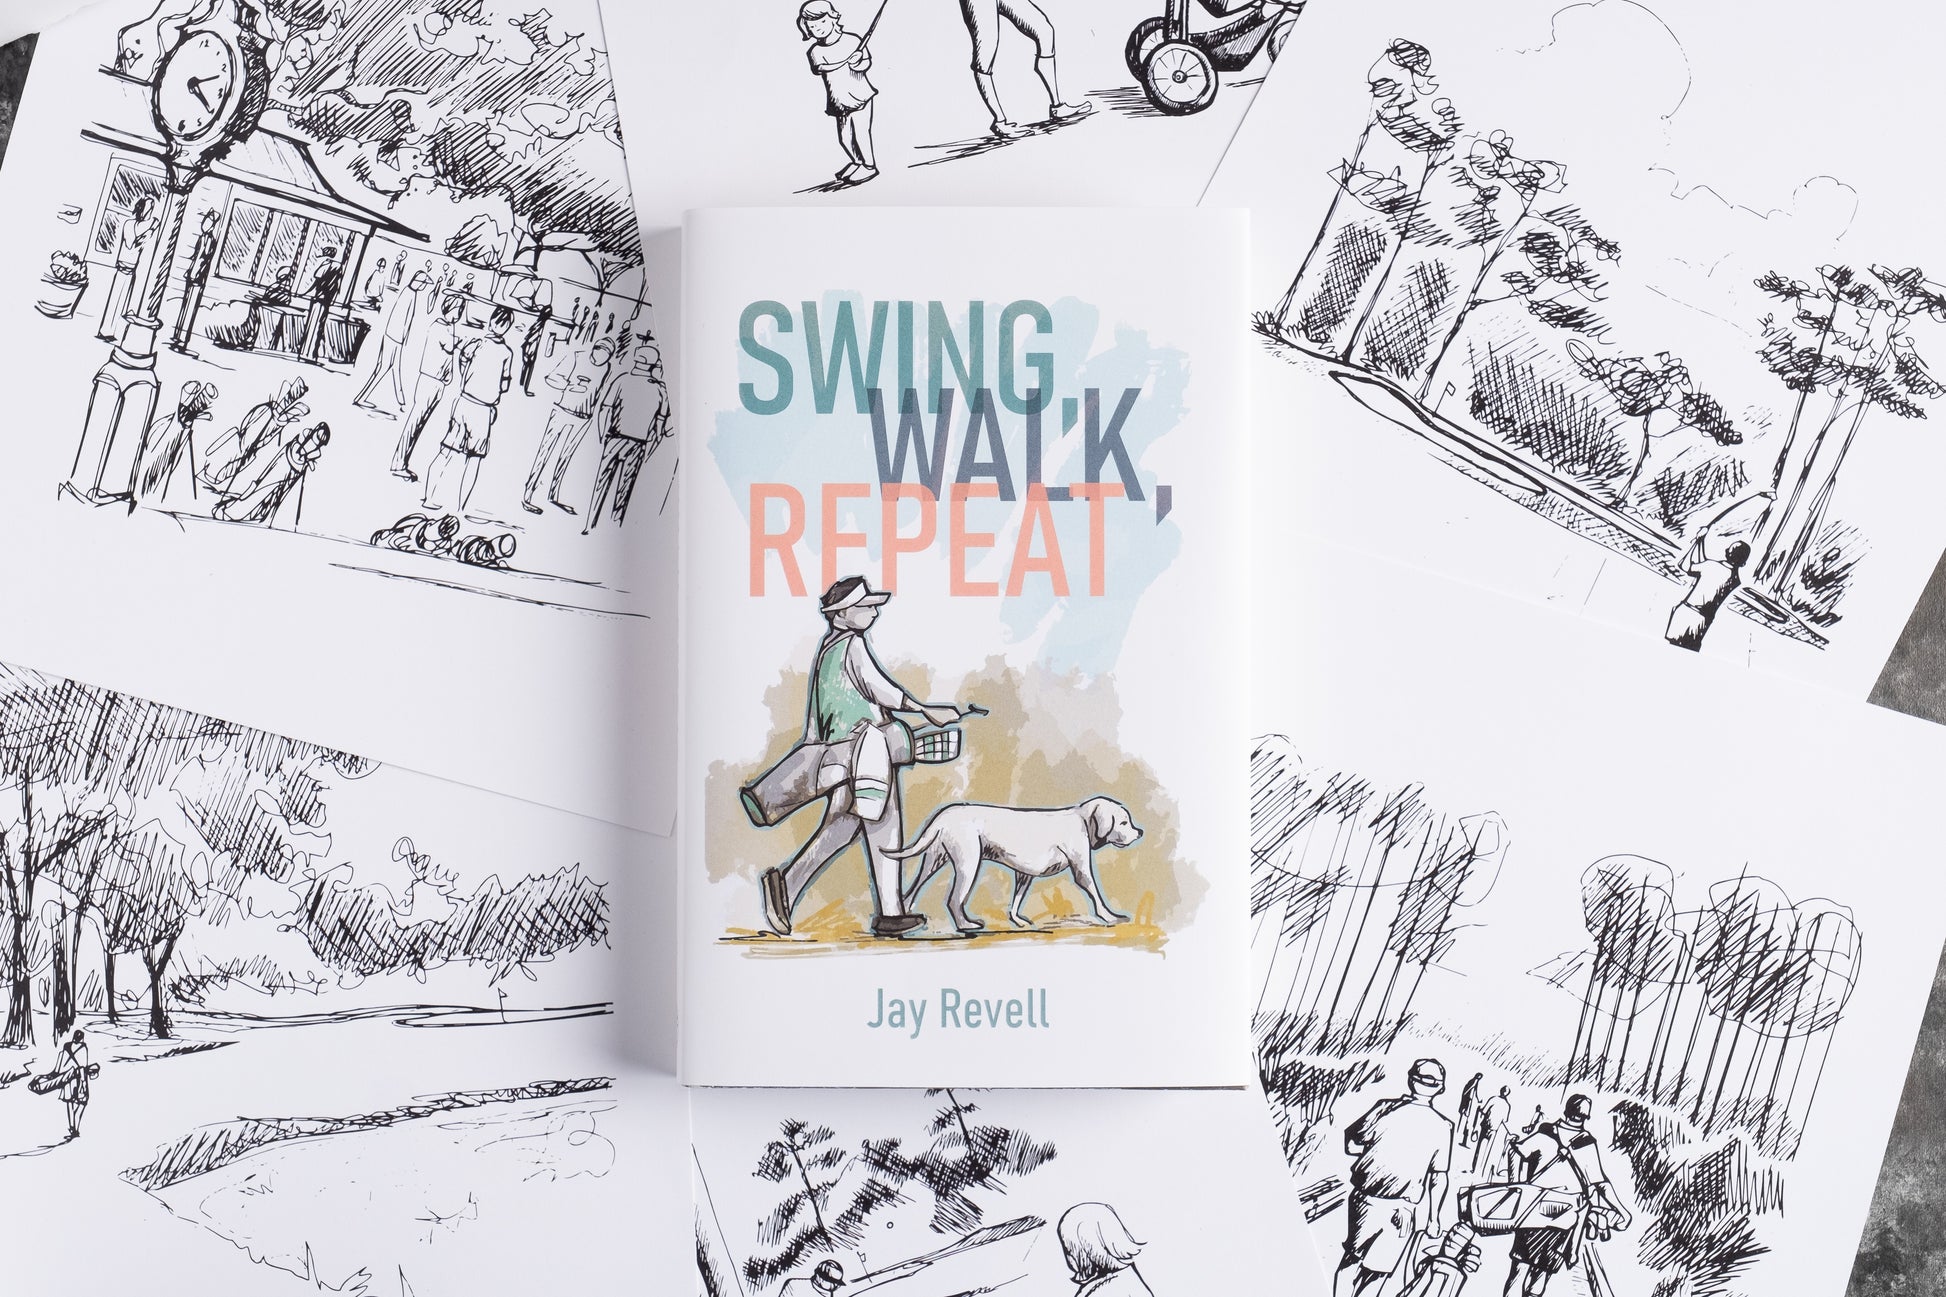 Swing Walk Repeat by Jay Revell with illustrations by Dave Baysden